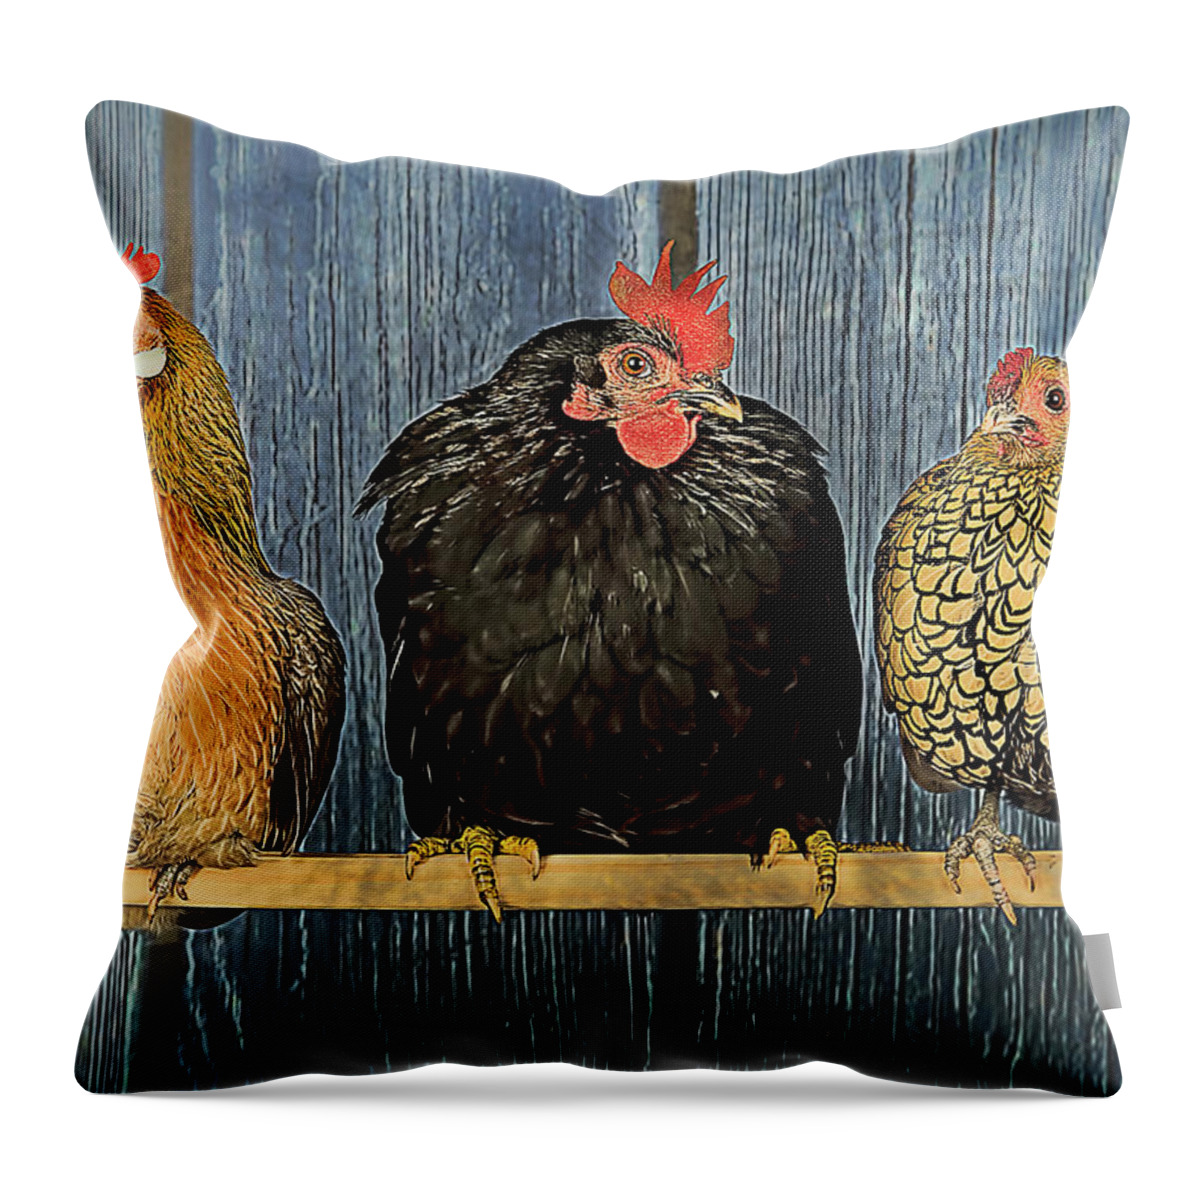 Three In A Row Throw Pillow featuring the mixed media Three In A Row by Bellesouth Studio